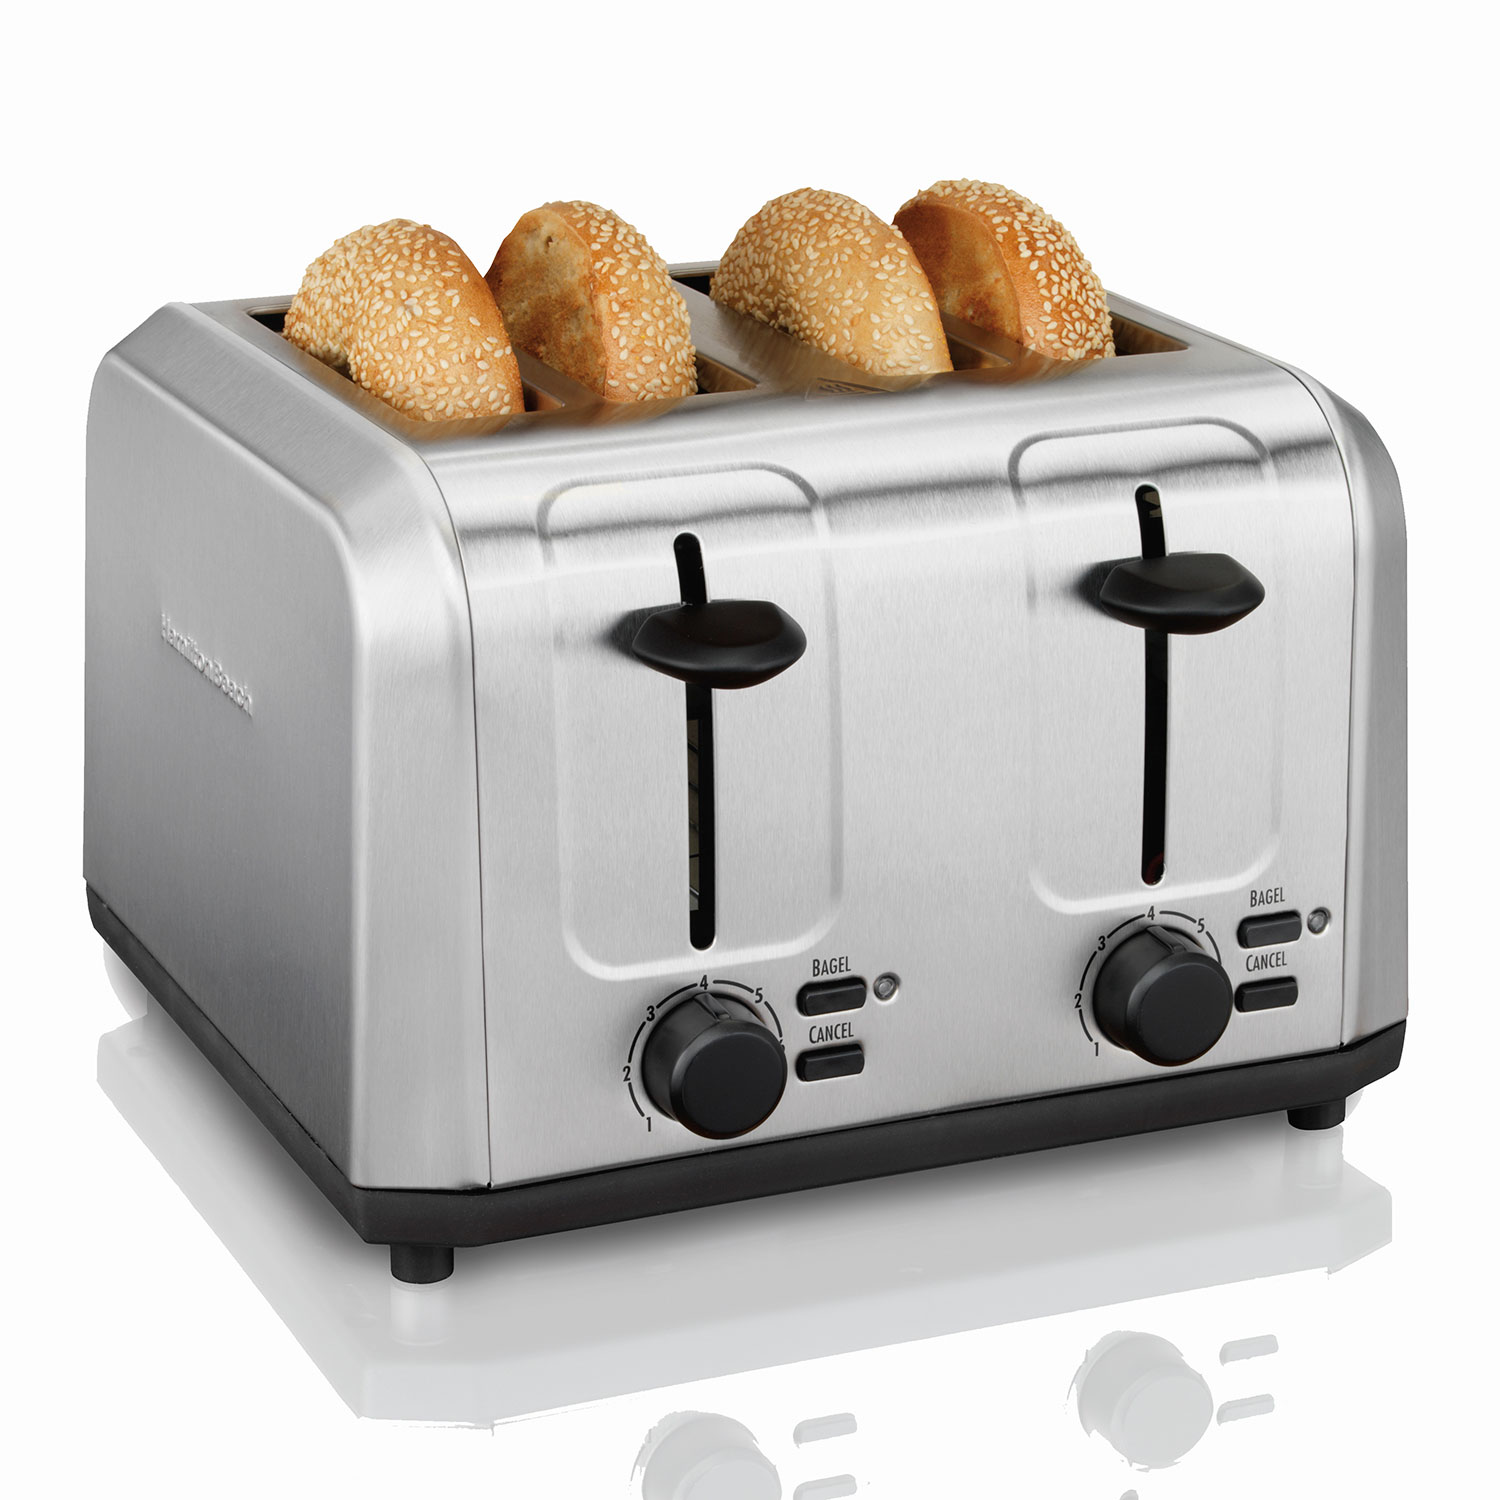 4 Slice Toaster with Extra-Wide Slots Stainless Steel (24911)